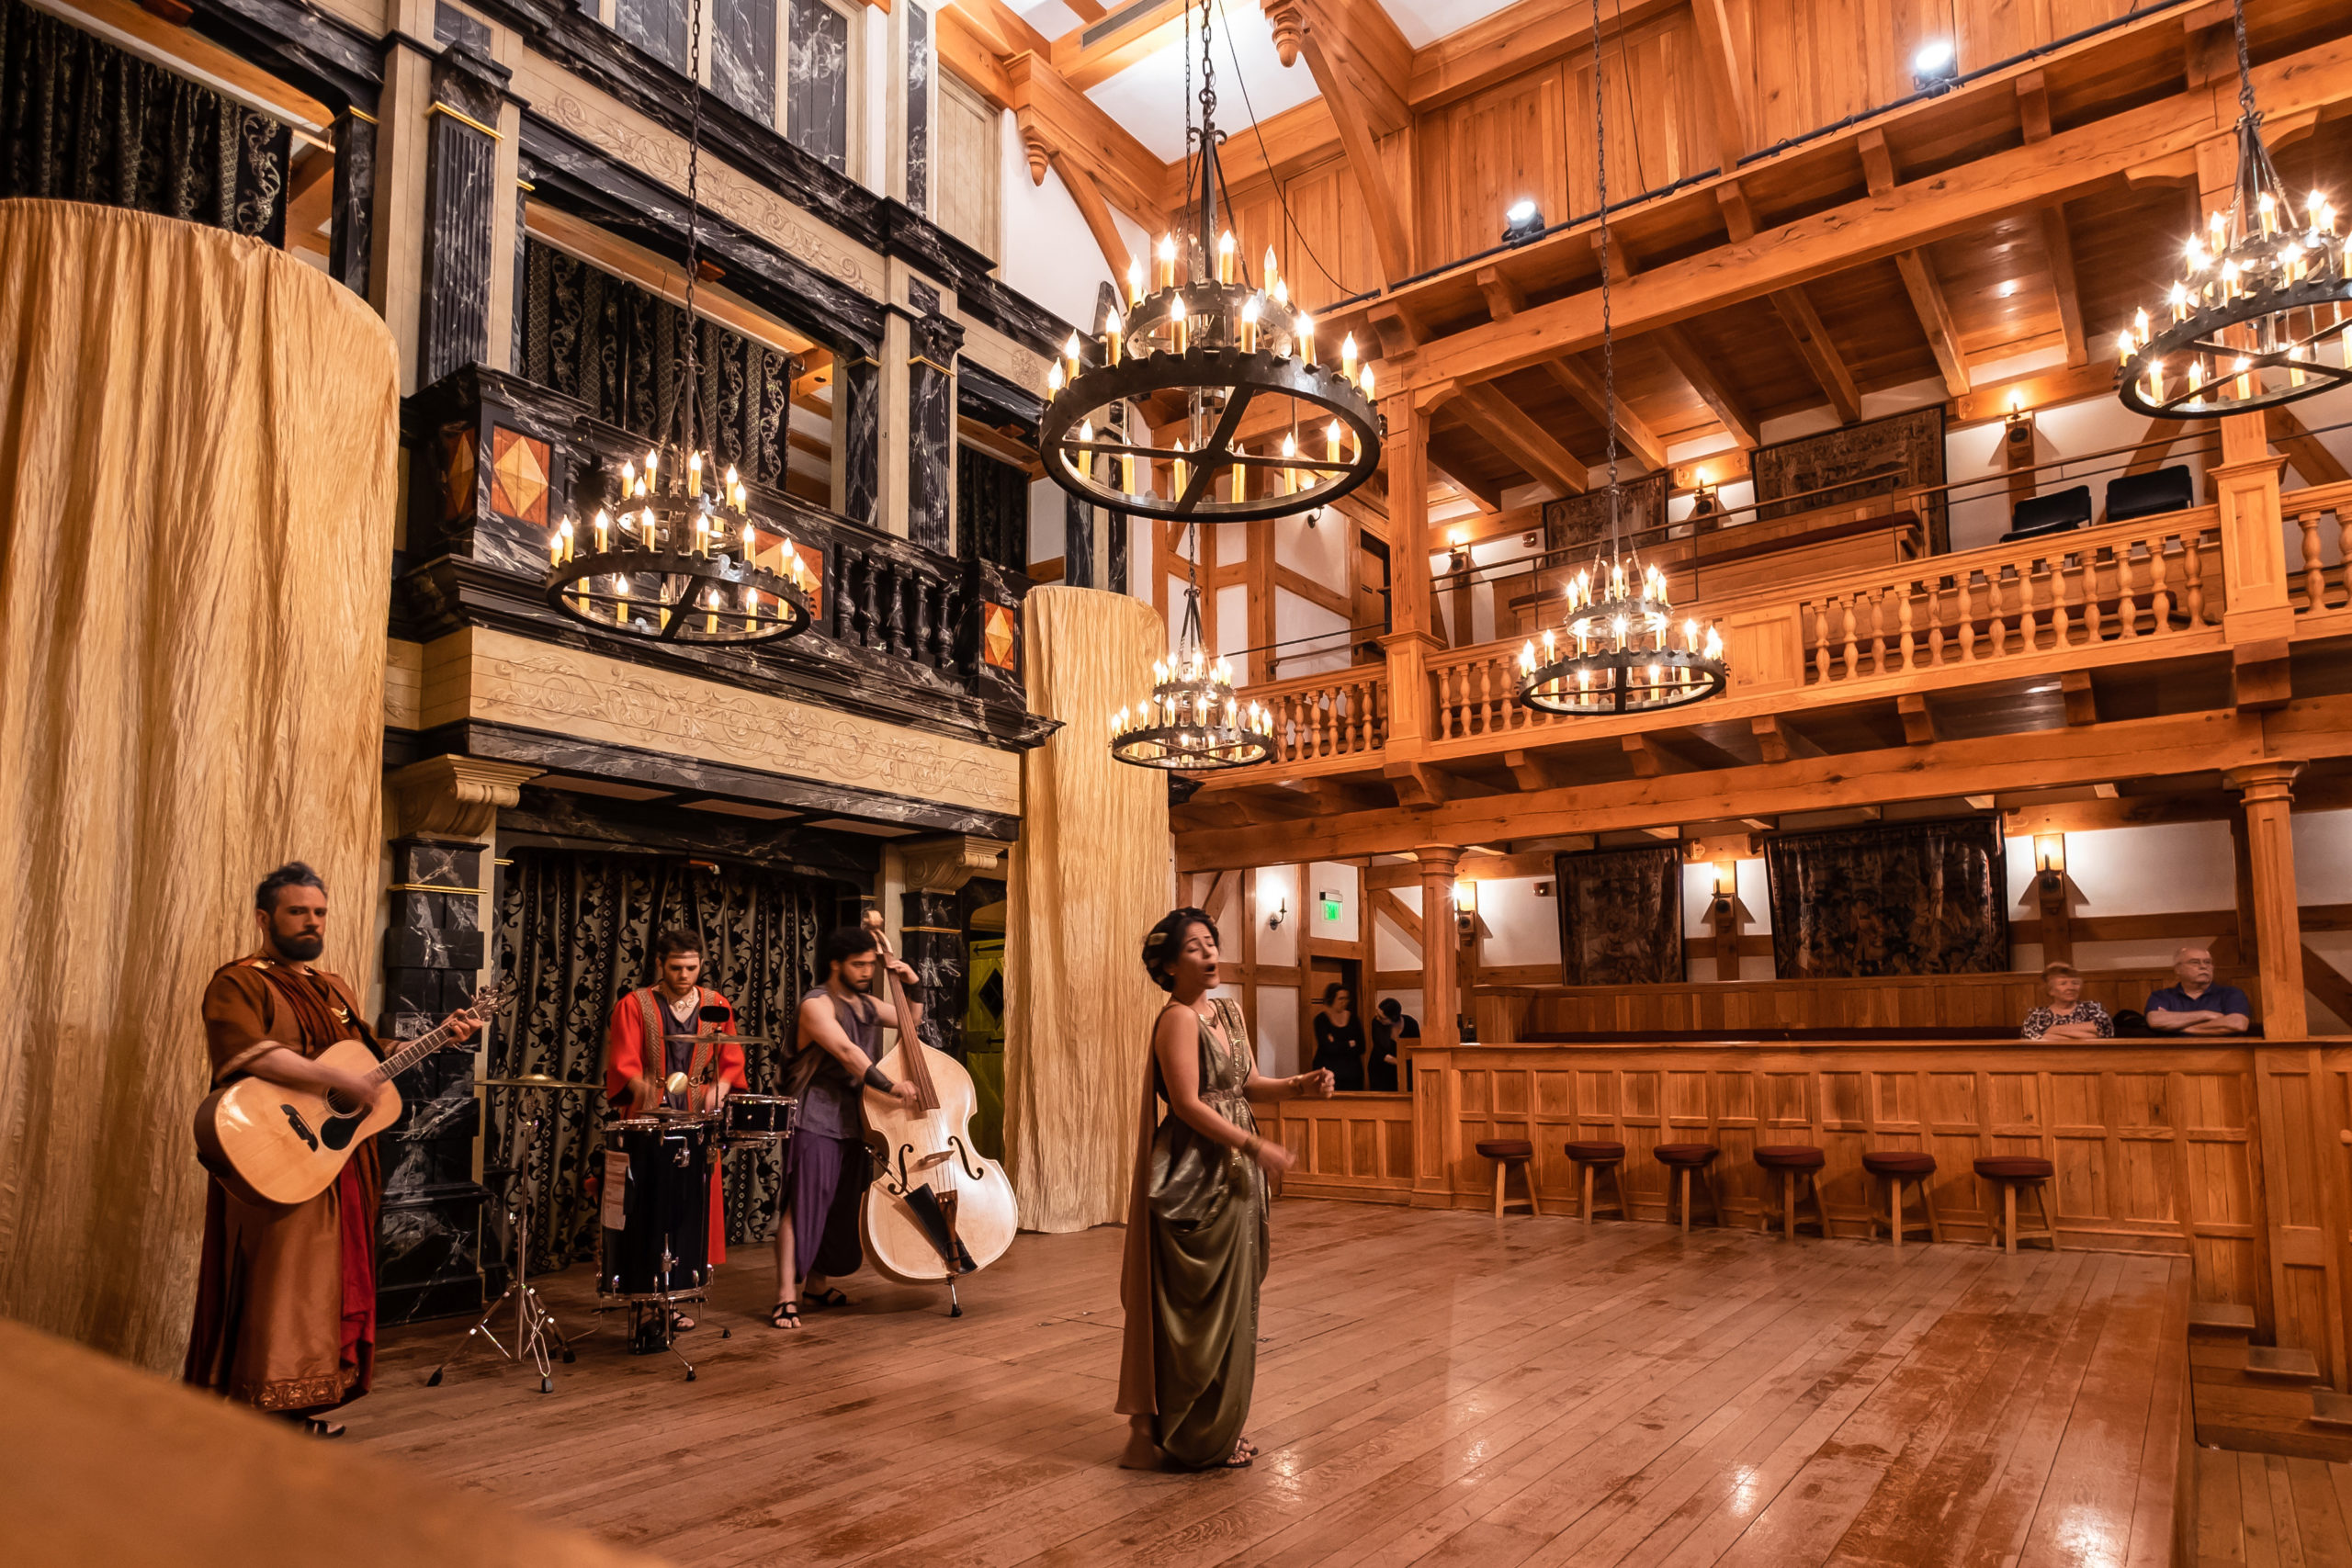 American Shakespeare Center Blackfriars Playhouse. Photo by Traveling Newlyweds @traveling_newlyweds and courtesy of Virginia Tourism Corporation